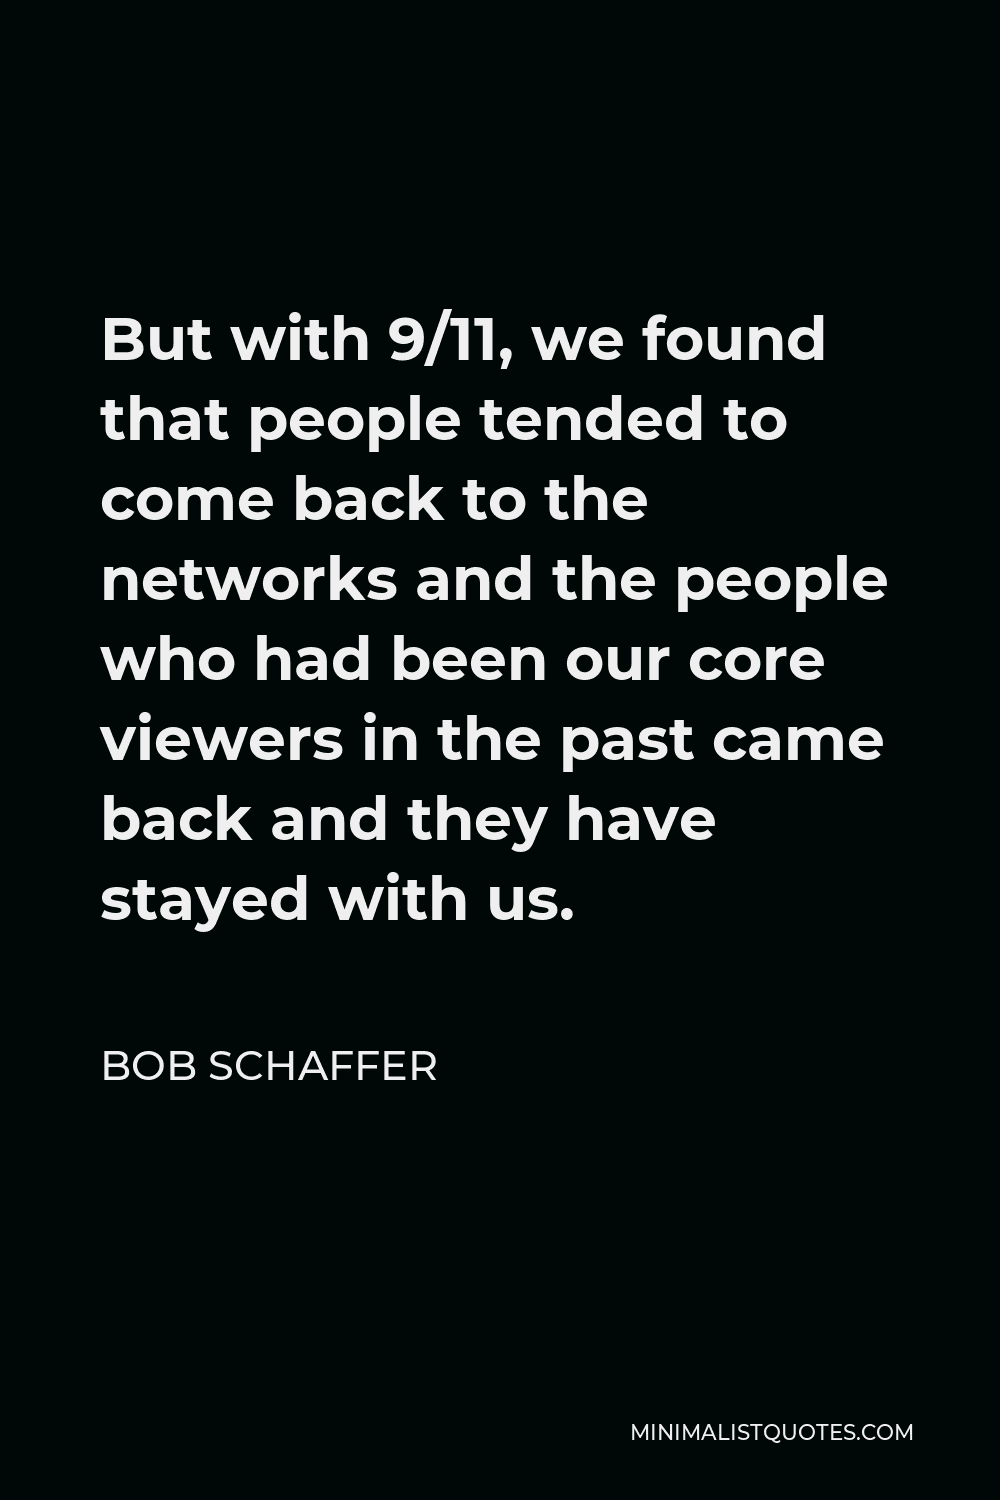 Bob Schaffer Quote - But with 9/11, we found that people tended to come back to the networks and the people who had been our core viewers in the past came back and they have stayed with us.